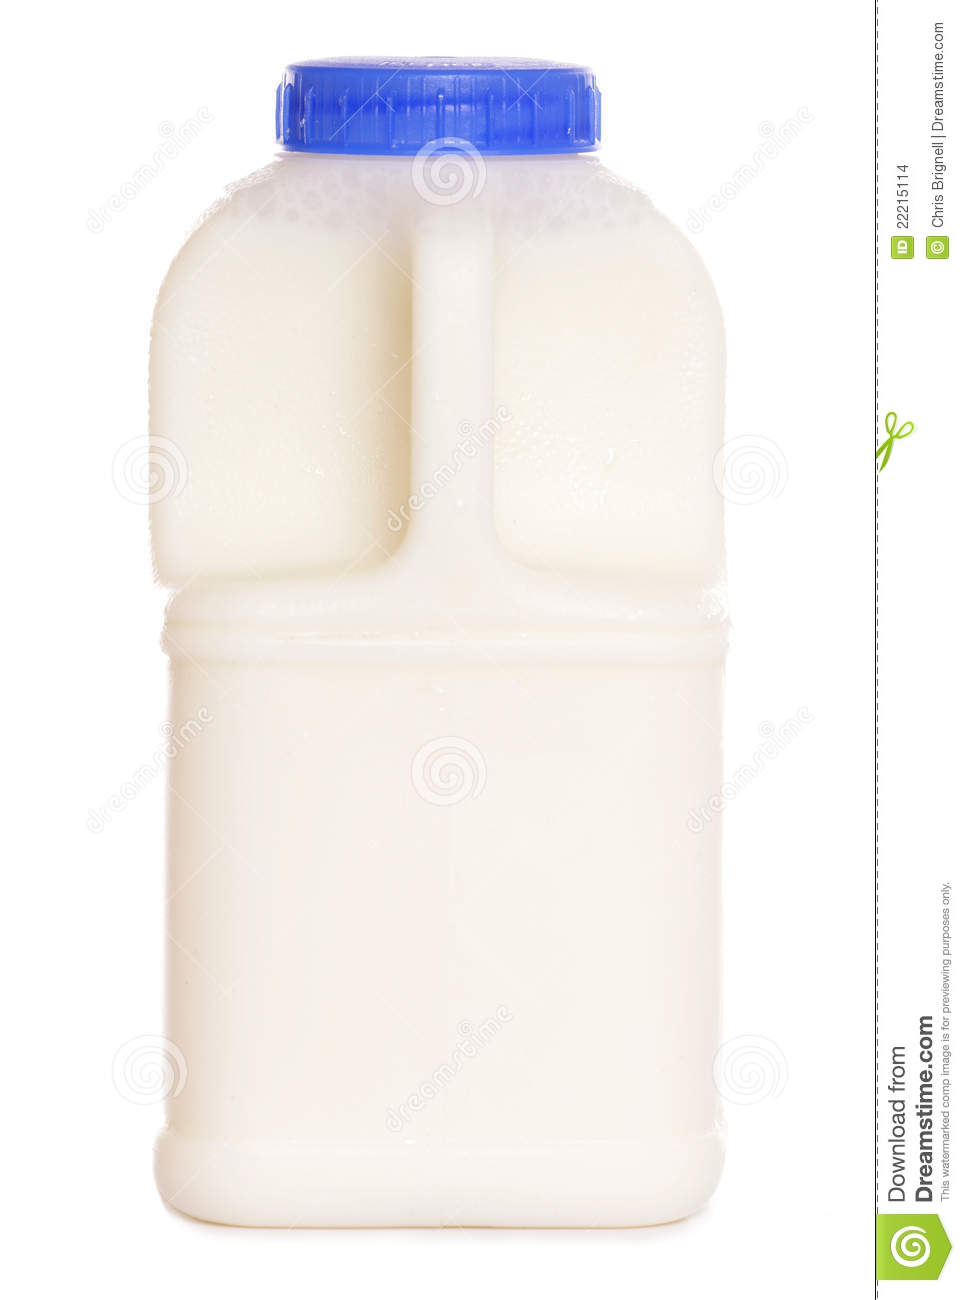 Pint Of Milk Stock Images   Image  22215114